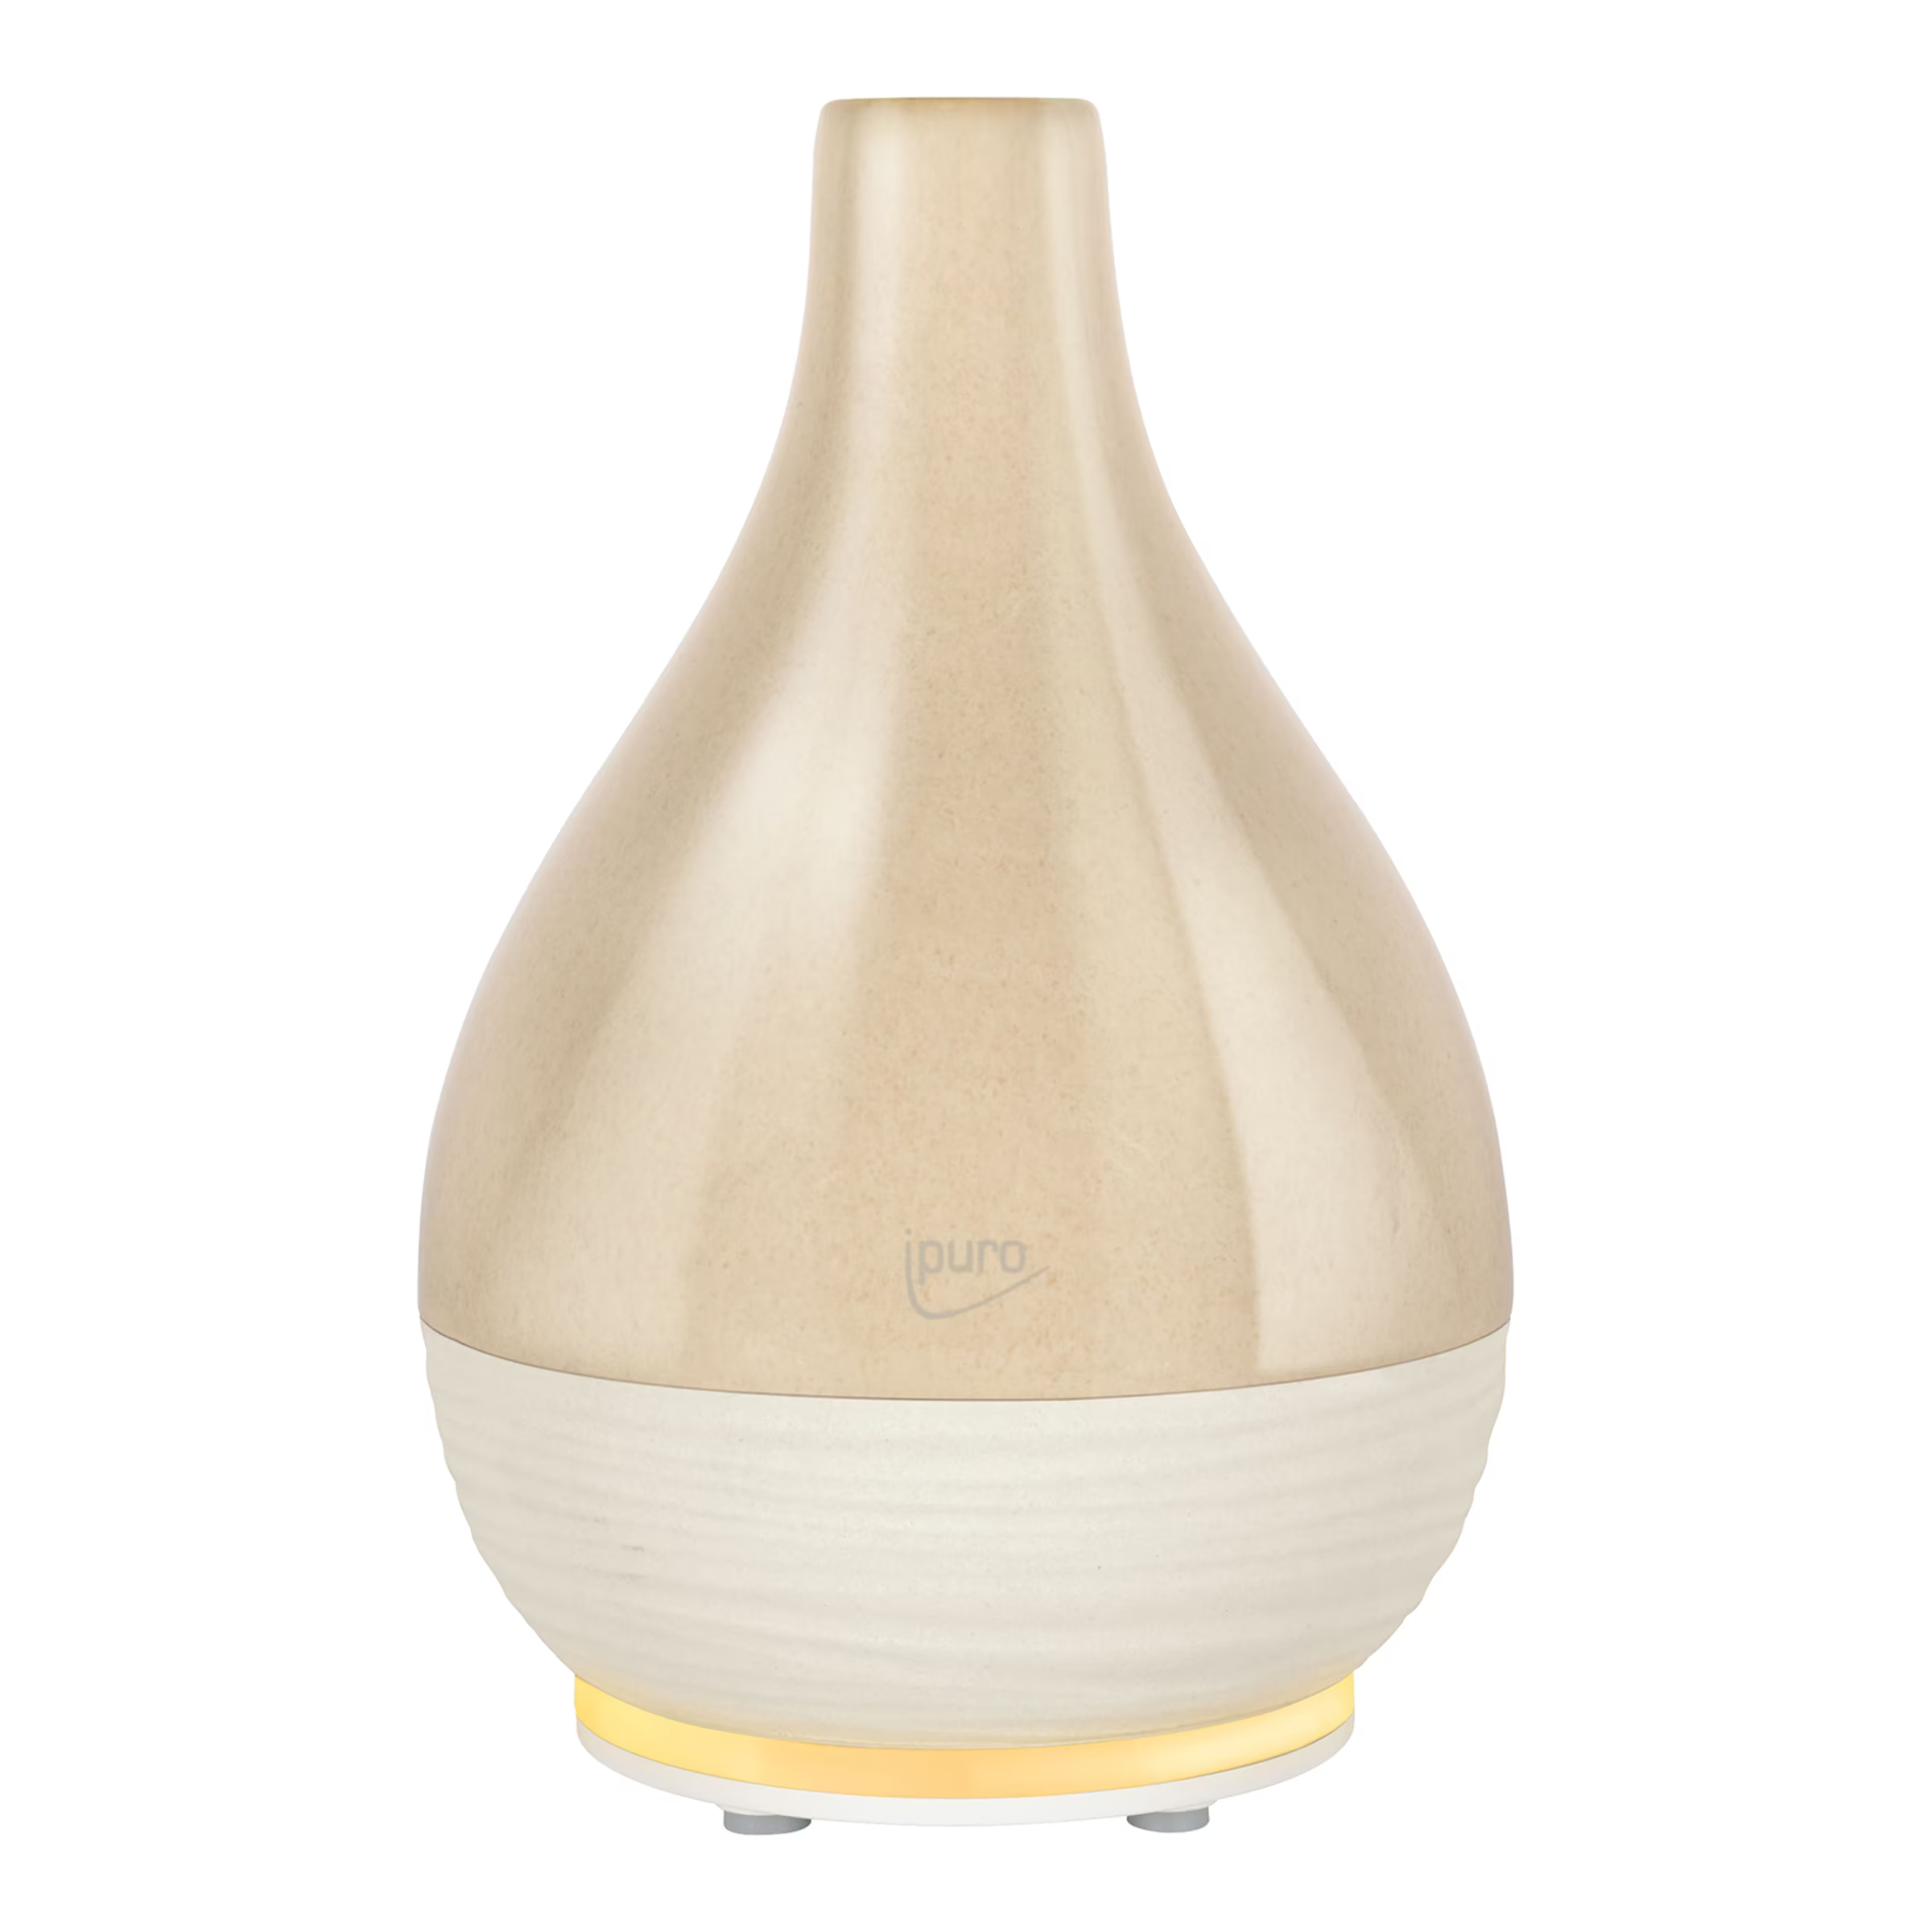 ipuro Air Sonic Aroma Diffusor, Vase two tone - Buy online now